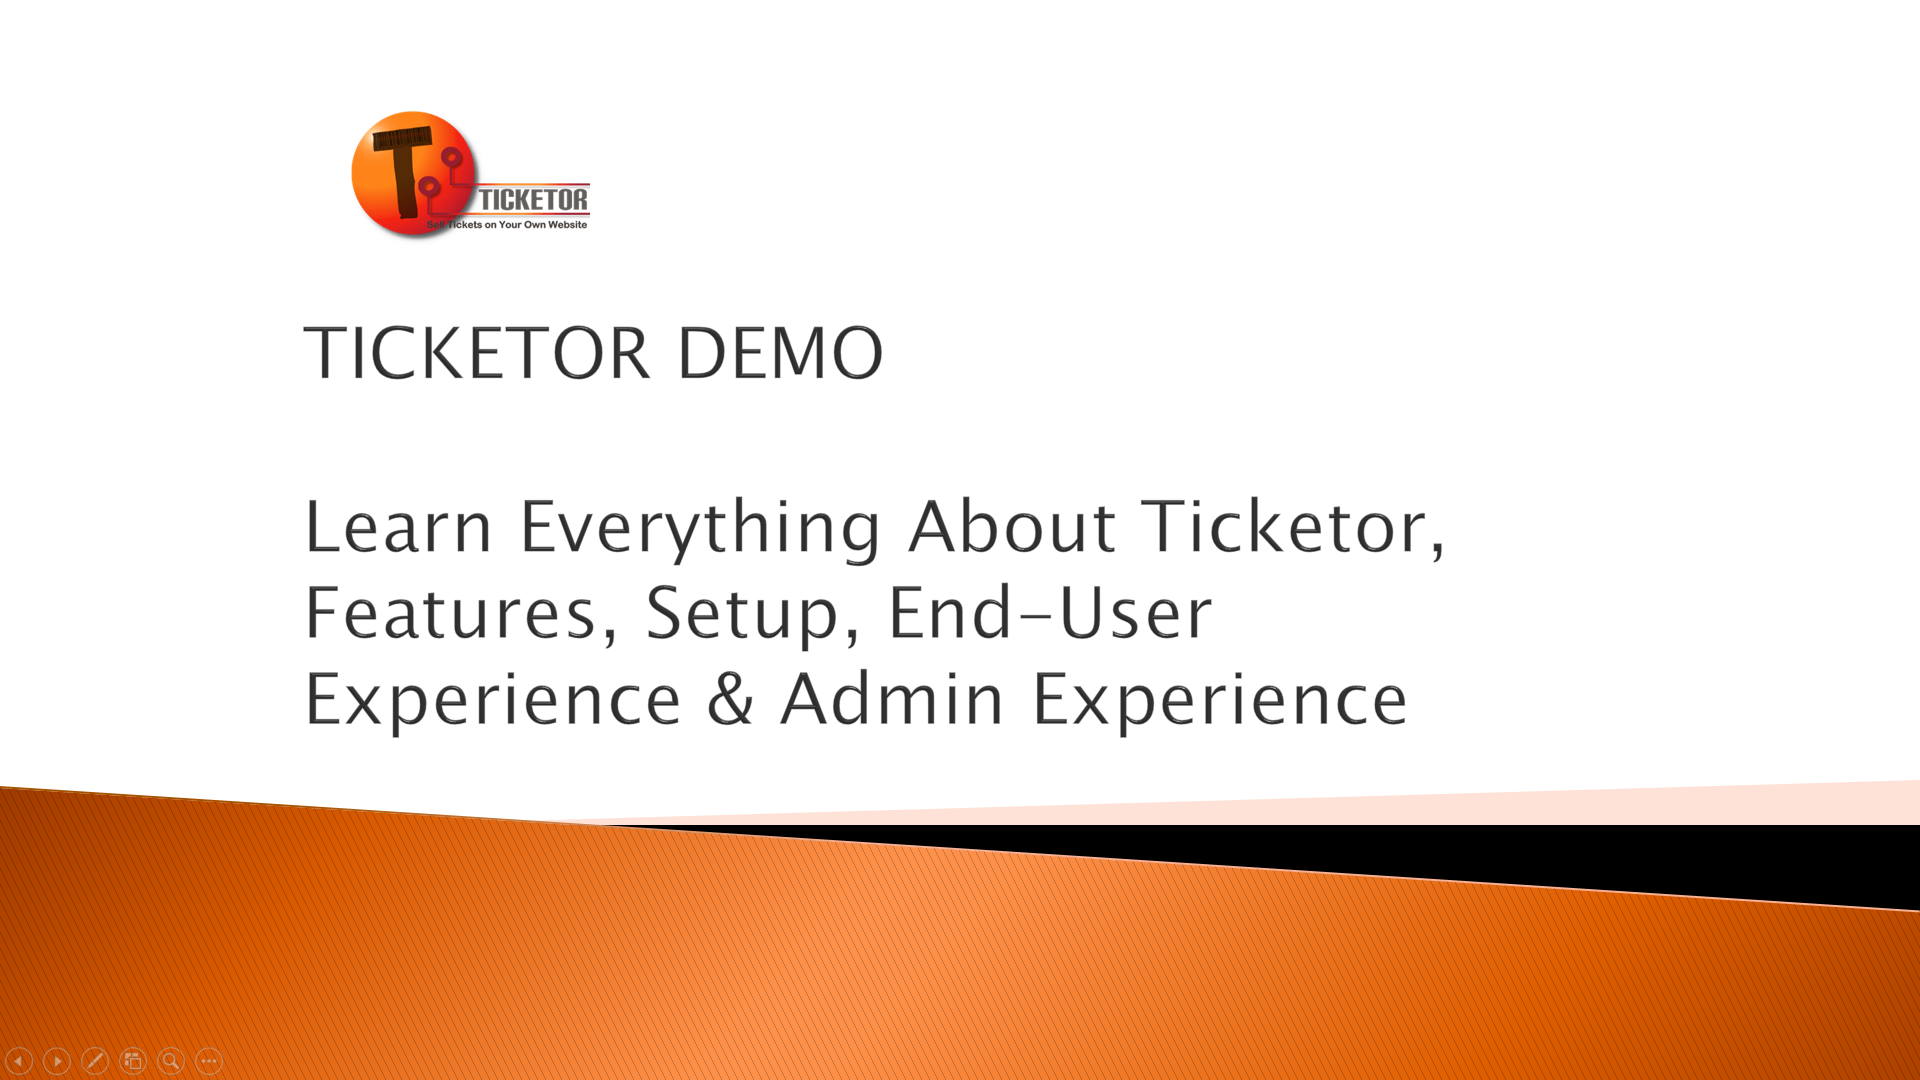 TICKETOR DEMO - Learn Everything About Ticketor, Features, Setup, End-User & Admin Experience